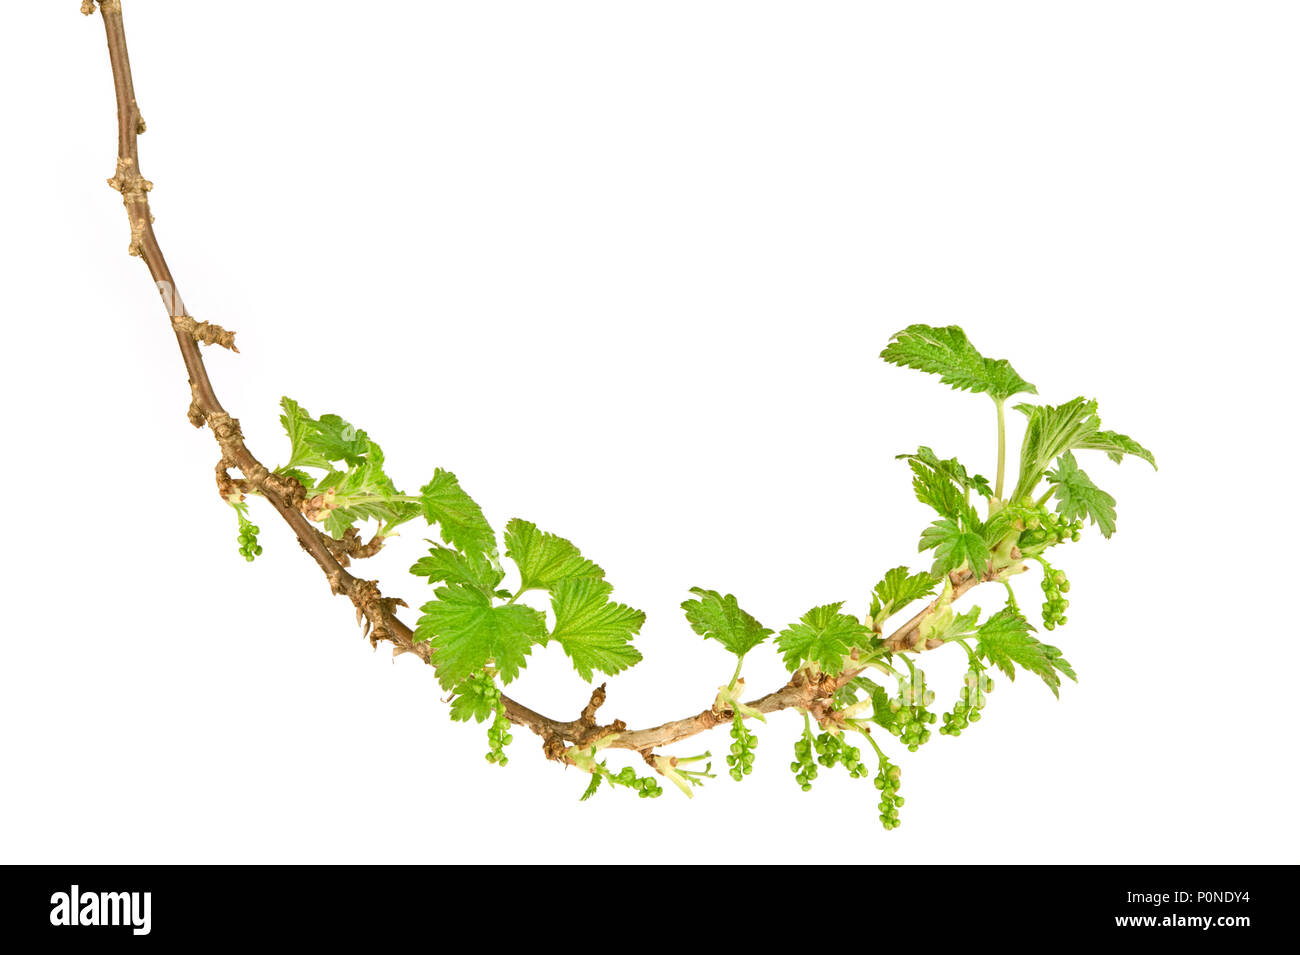 Blackcurrant (Ribes nigrum) branch in spring. Isolated on white background. Stock Photo